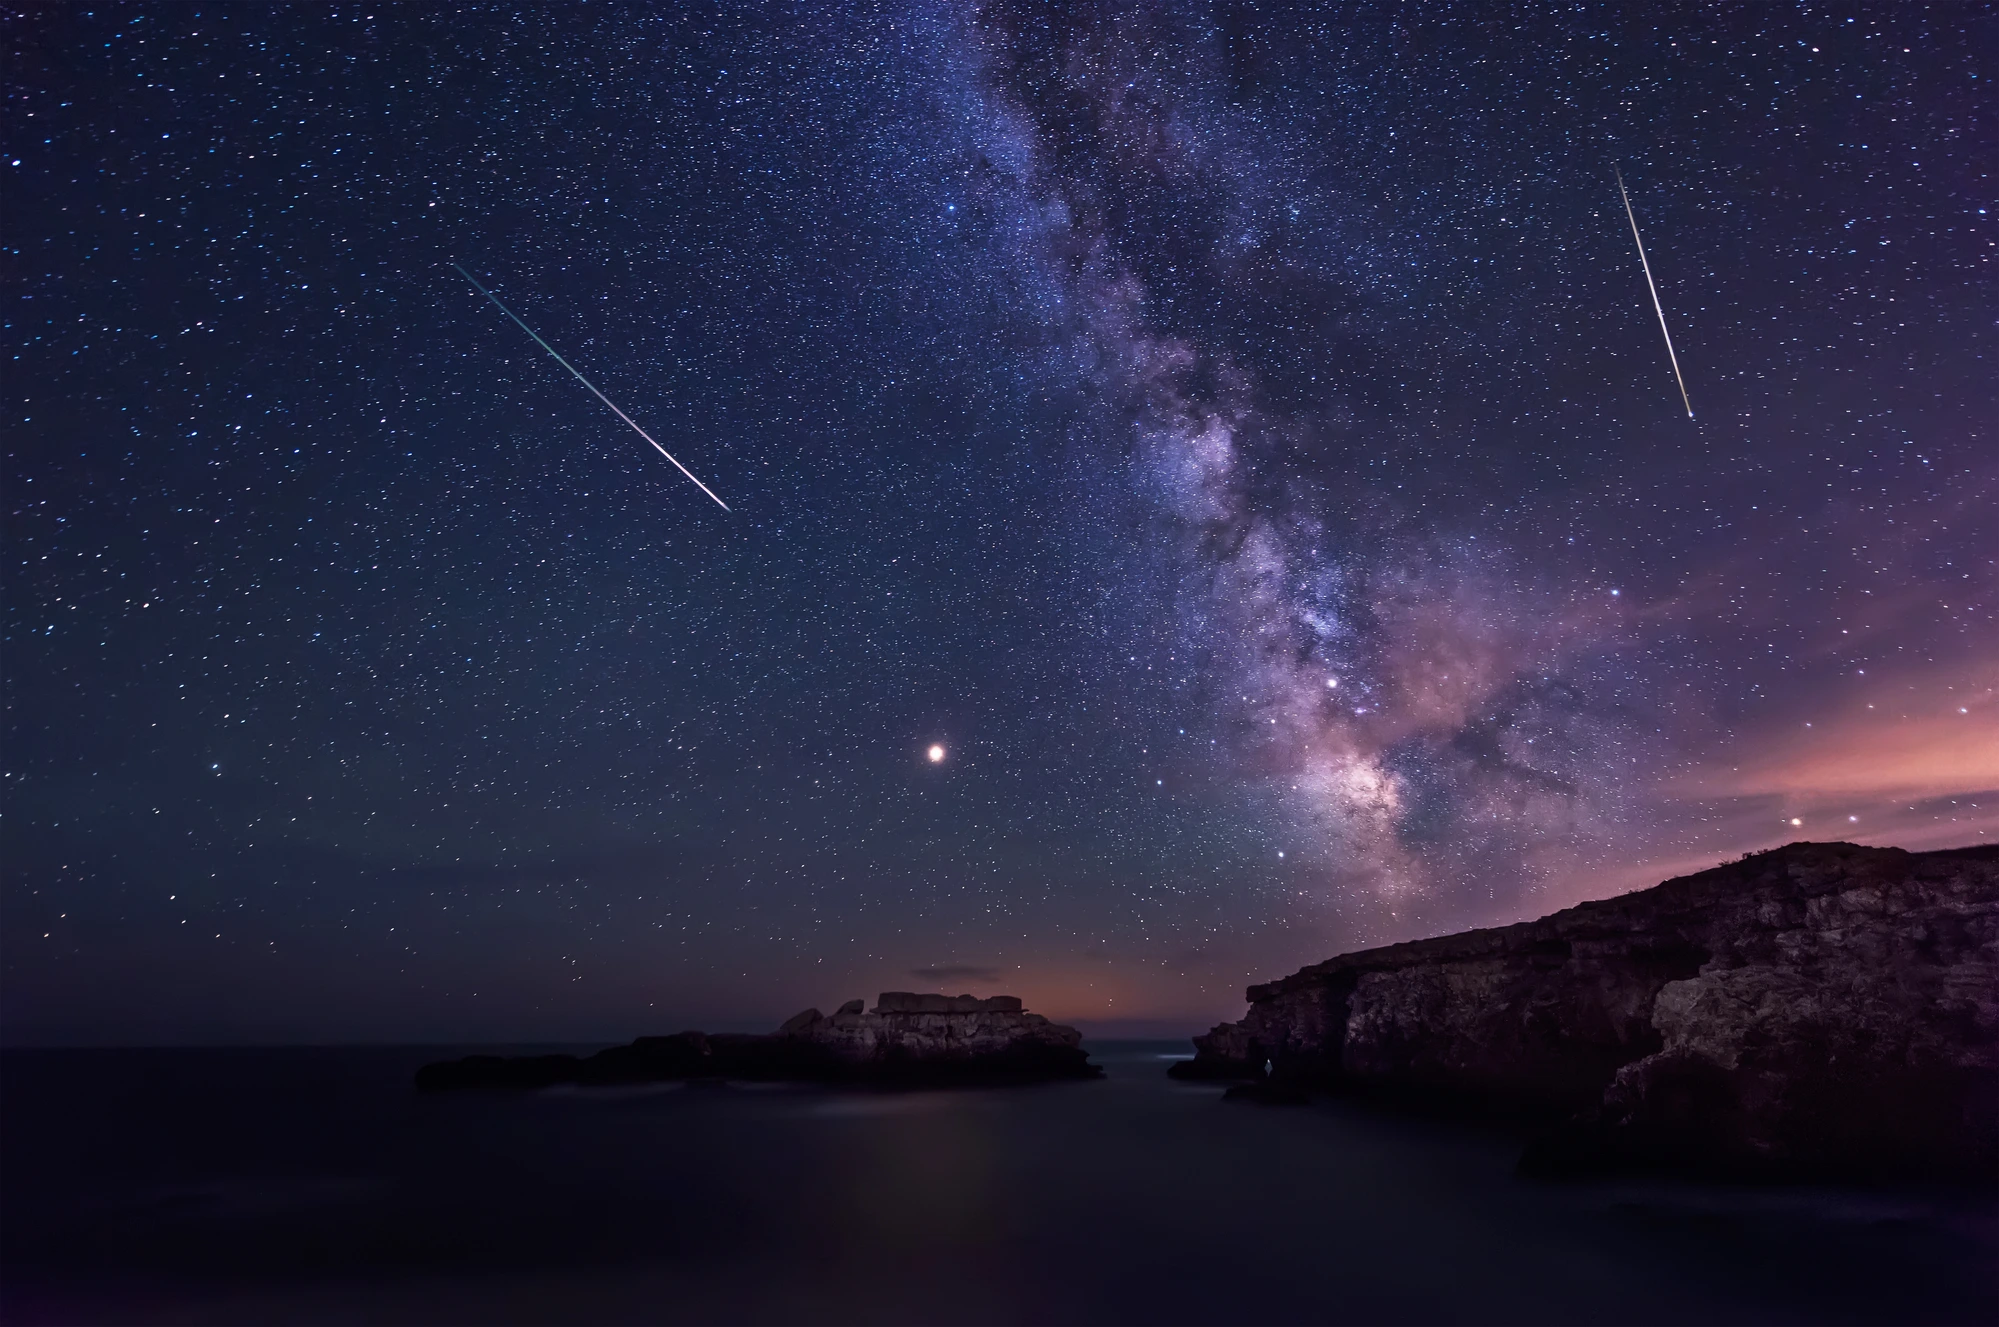 Taurids Meteor Shower and Its Impact on Your Zodiac